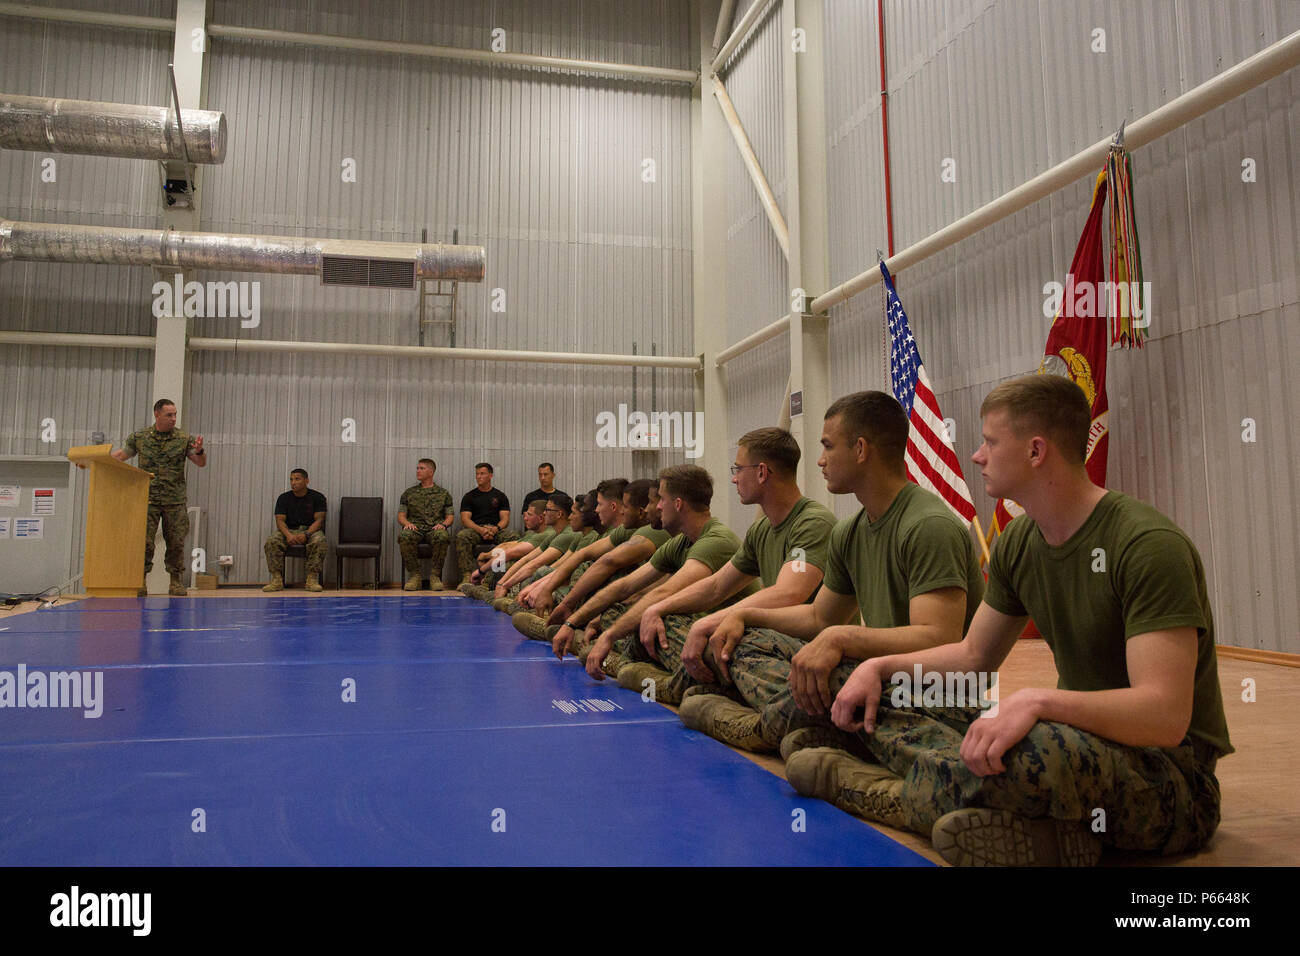 U.S. Marine Corps Maj. Christopher M. Reynolds, the executive officer of Black Sea Rotational Force, addresses the soon to be Marine Corps Martial Arts Instructors during their graduation ceremony aboard Mihail Kognalniceanu Air Base, Romania, April 22, 2016. These graduates spent three weeks enduring physical training sessions, learning how to correctly give hip-pocket classes, and how to properly teach techniques of all belt levels of the Marine Corps Martial-Arts Program. (U.S. Marine Corps photo by Cpl. Kelly L. Street, 2D MARDIV COMCAM/Released) Stock Photo